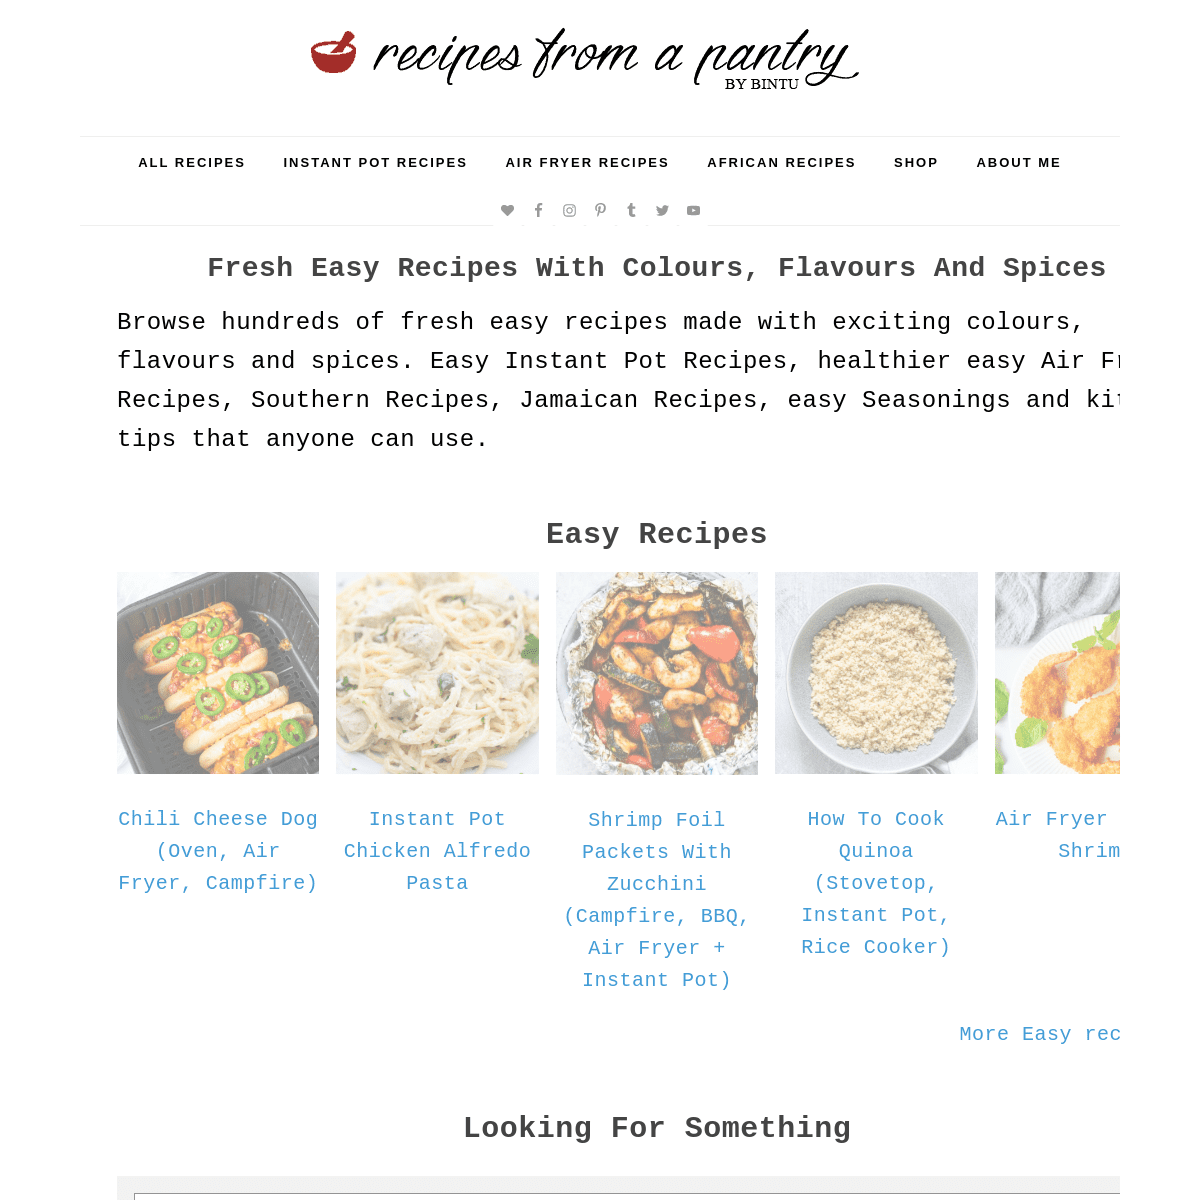 A complete backup of https://recipesfromapantry.com